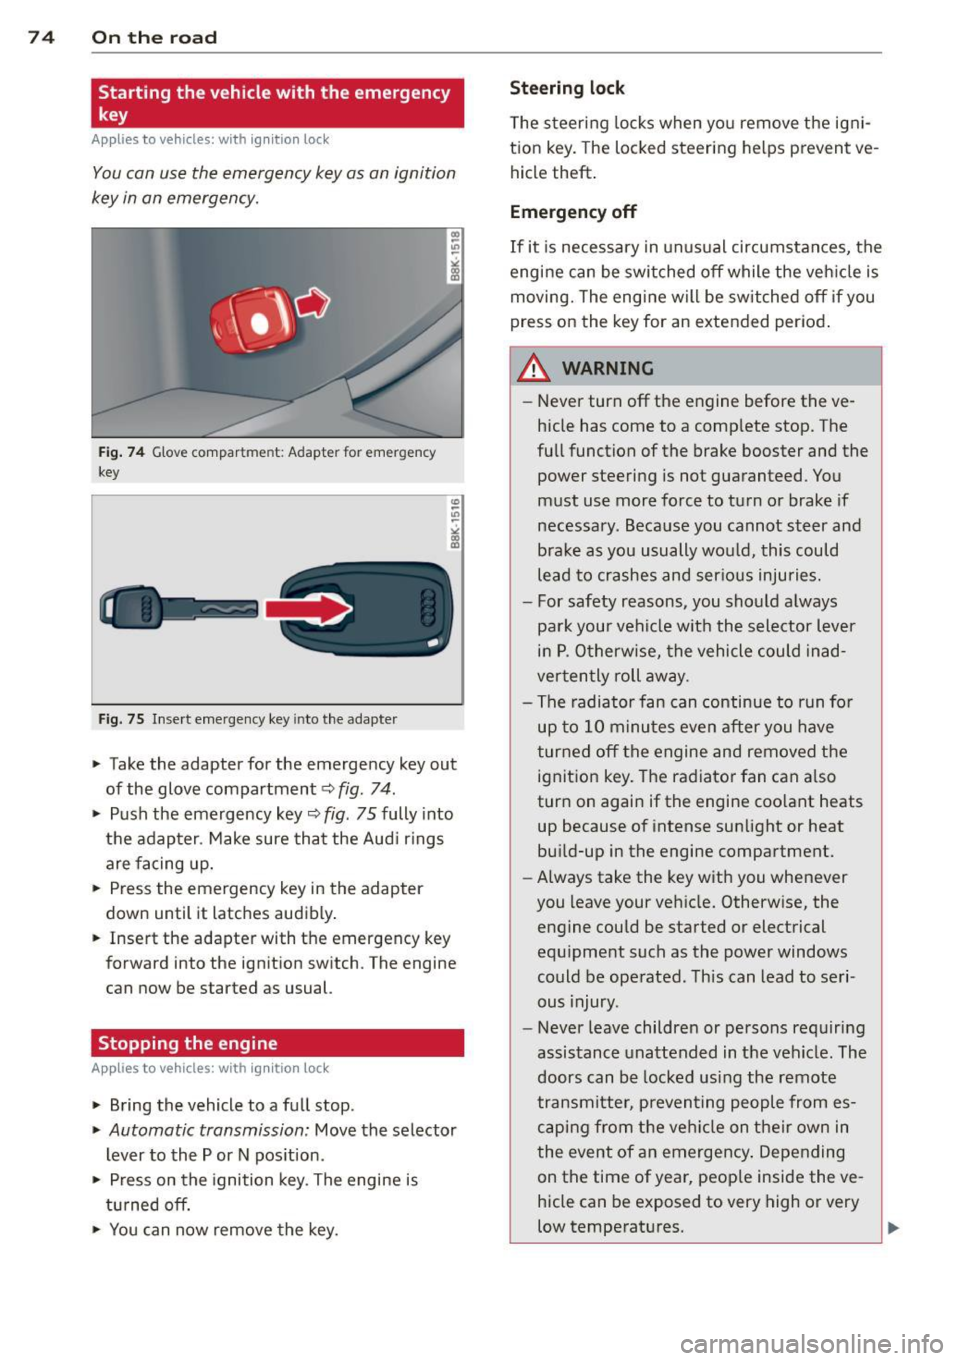 AUDI S4 SEDAN 2013  Owners Manual 7 4  On  the  road 
Starting  the  vehicle  with  the  emergency 
key 
Applies to  vehicles:  with ig ni tion  lock 
You can use  the  emergency  key as  an ignition 
key  in on emergency. 
Fi g.  74 